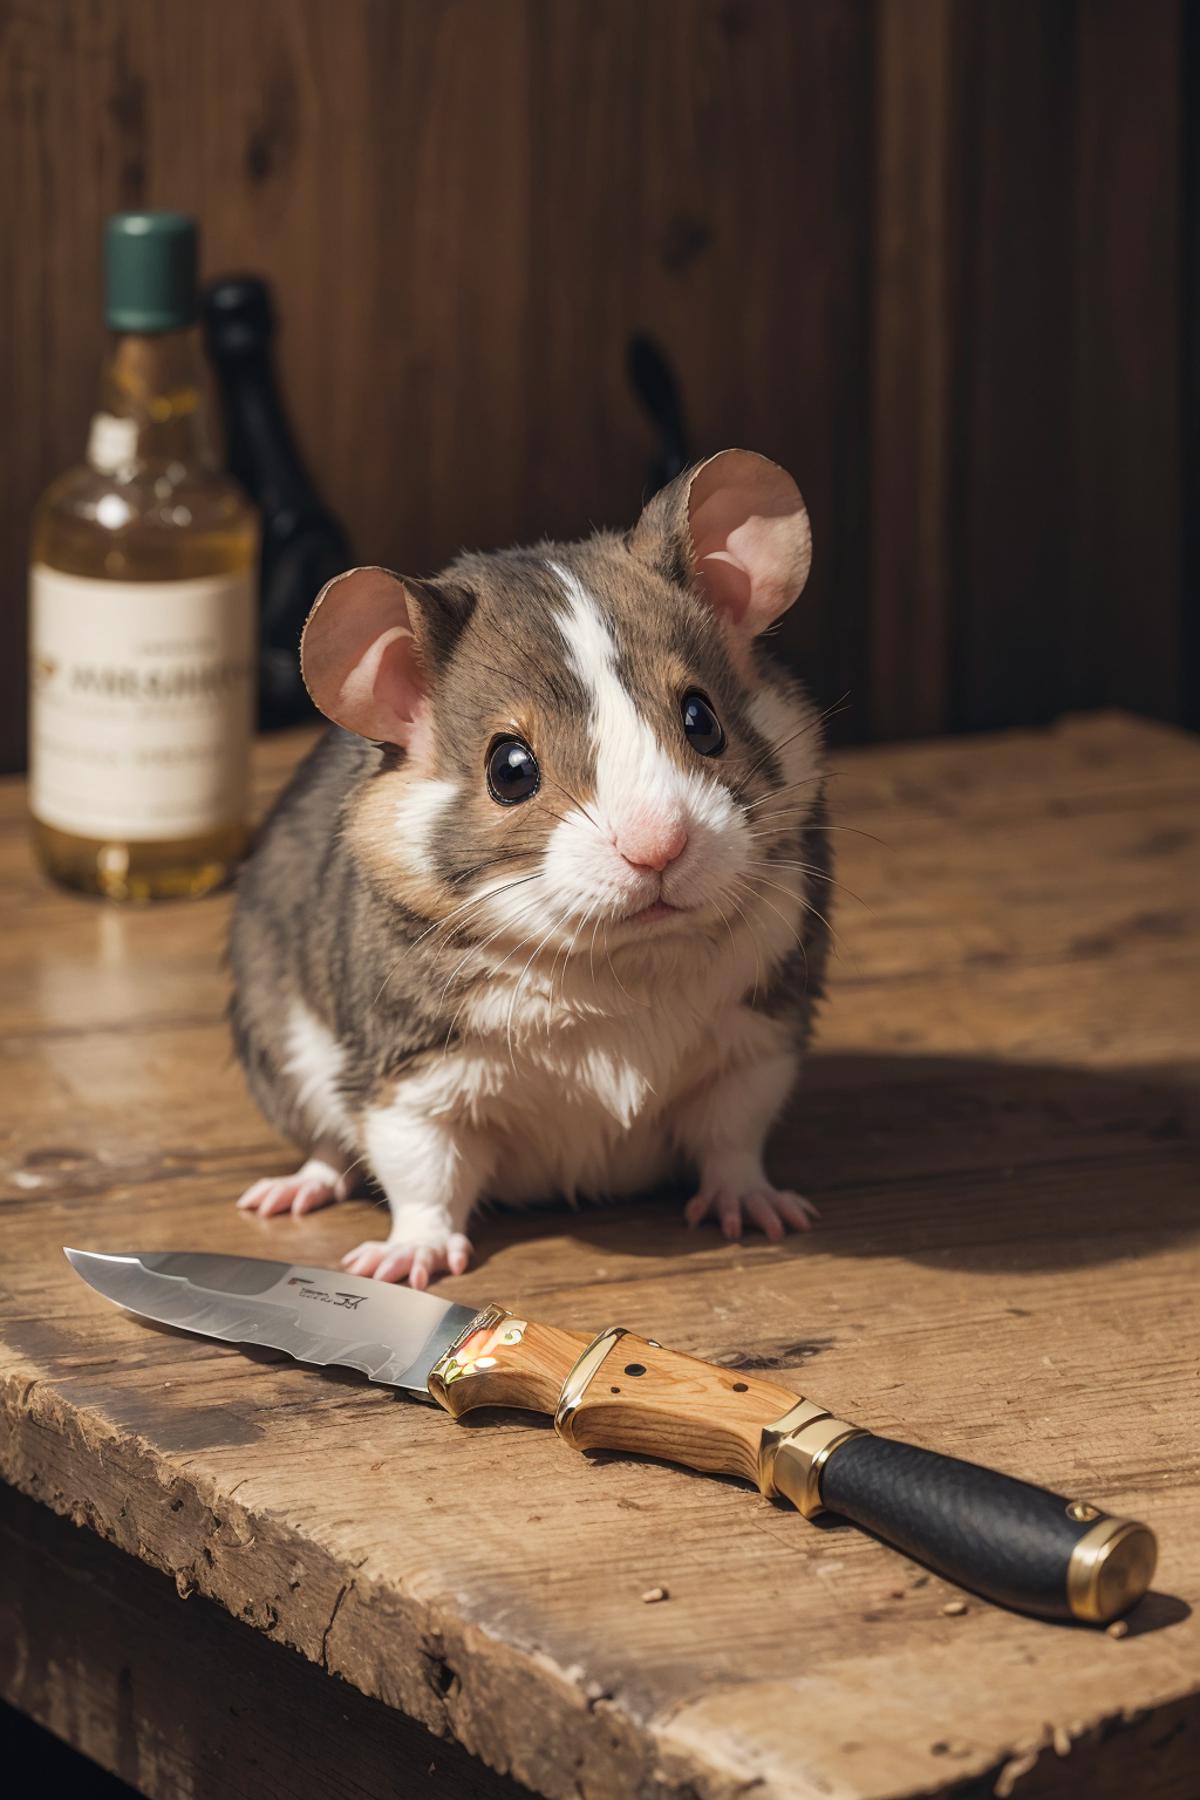 A Hamster with Large Eyes on a Table with a Knife and a Bottle.